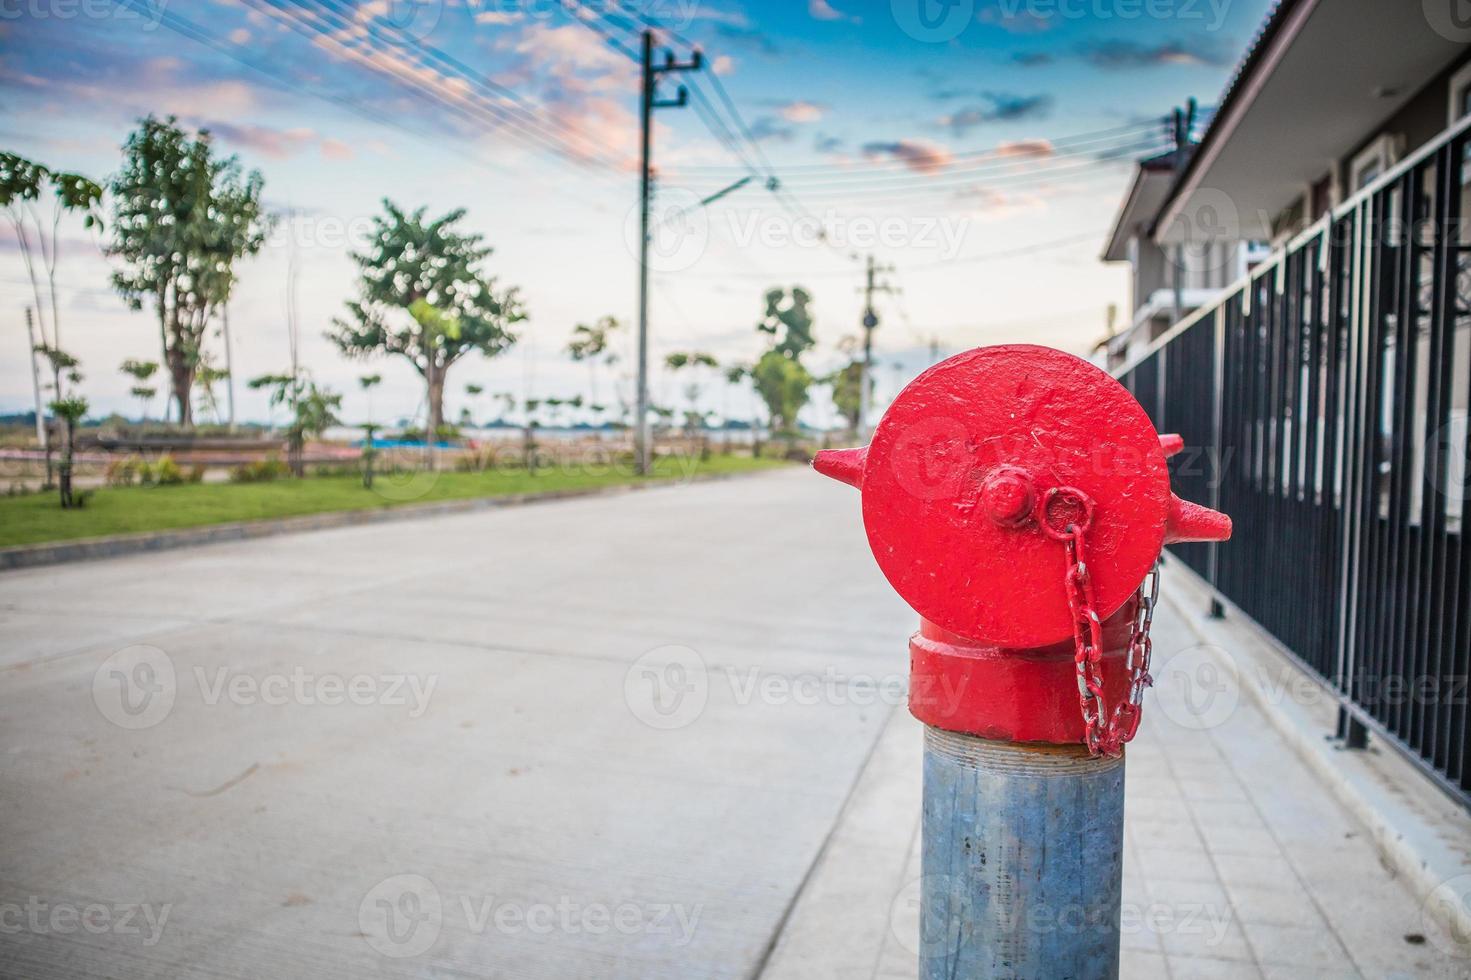 red fire hydrant in the village photo